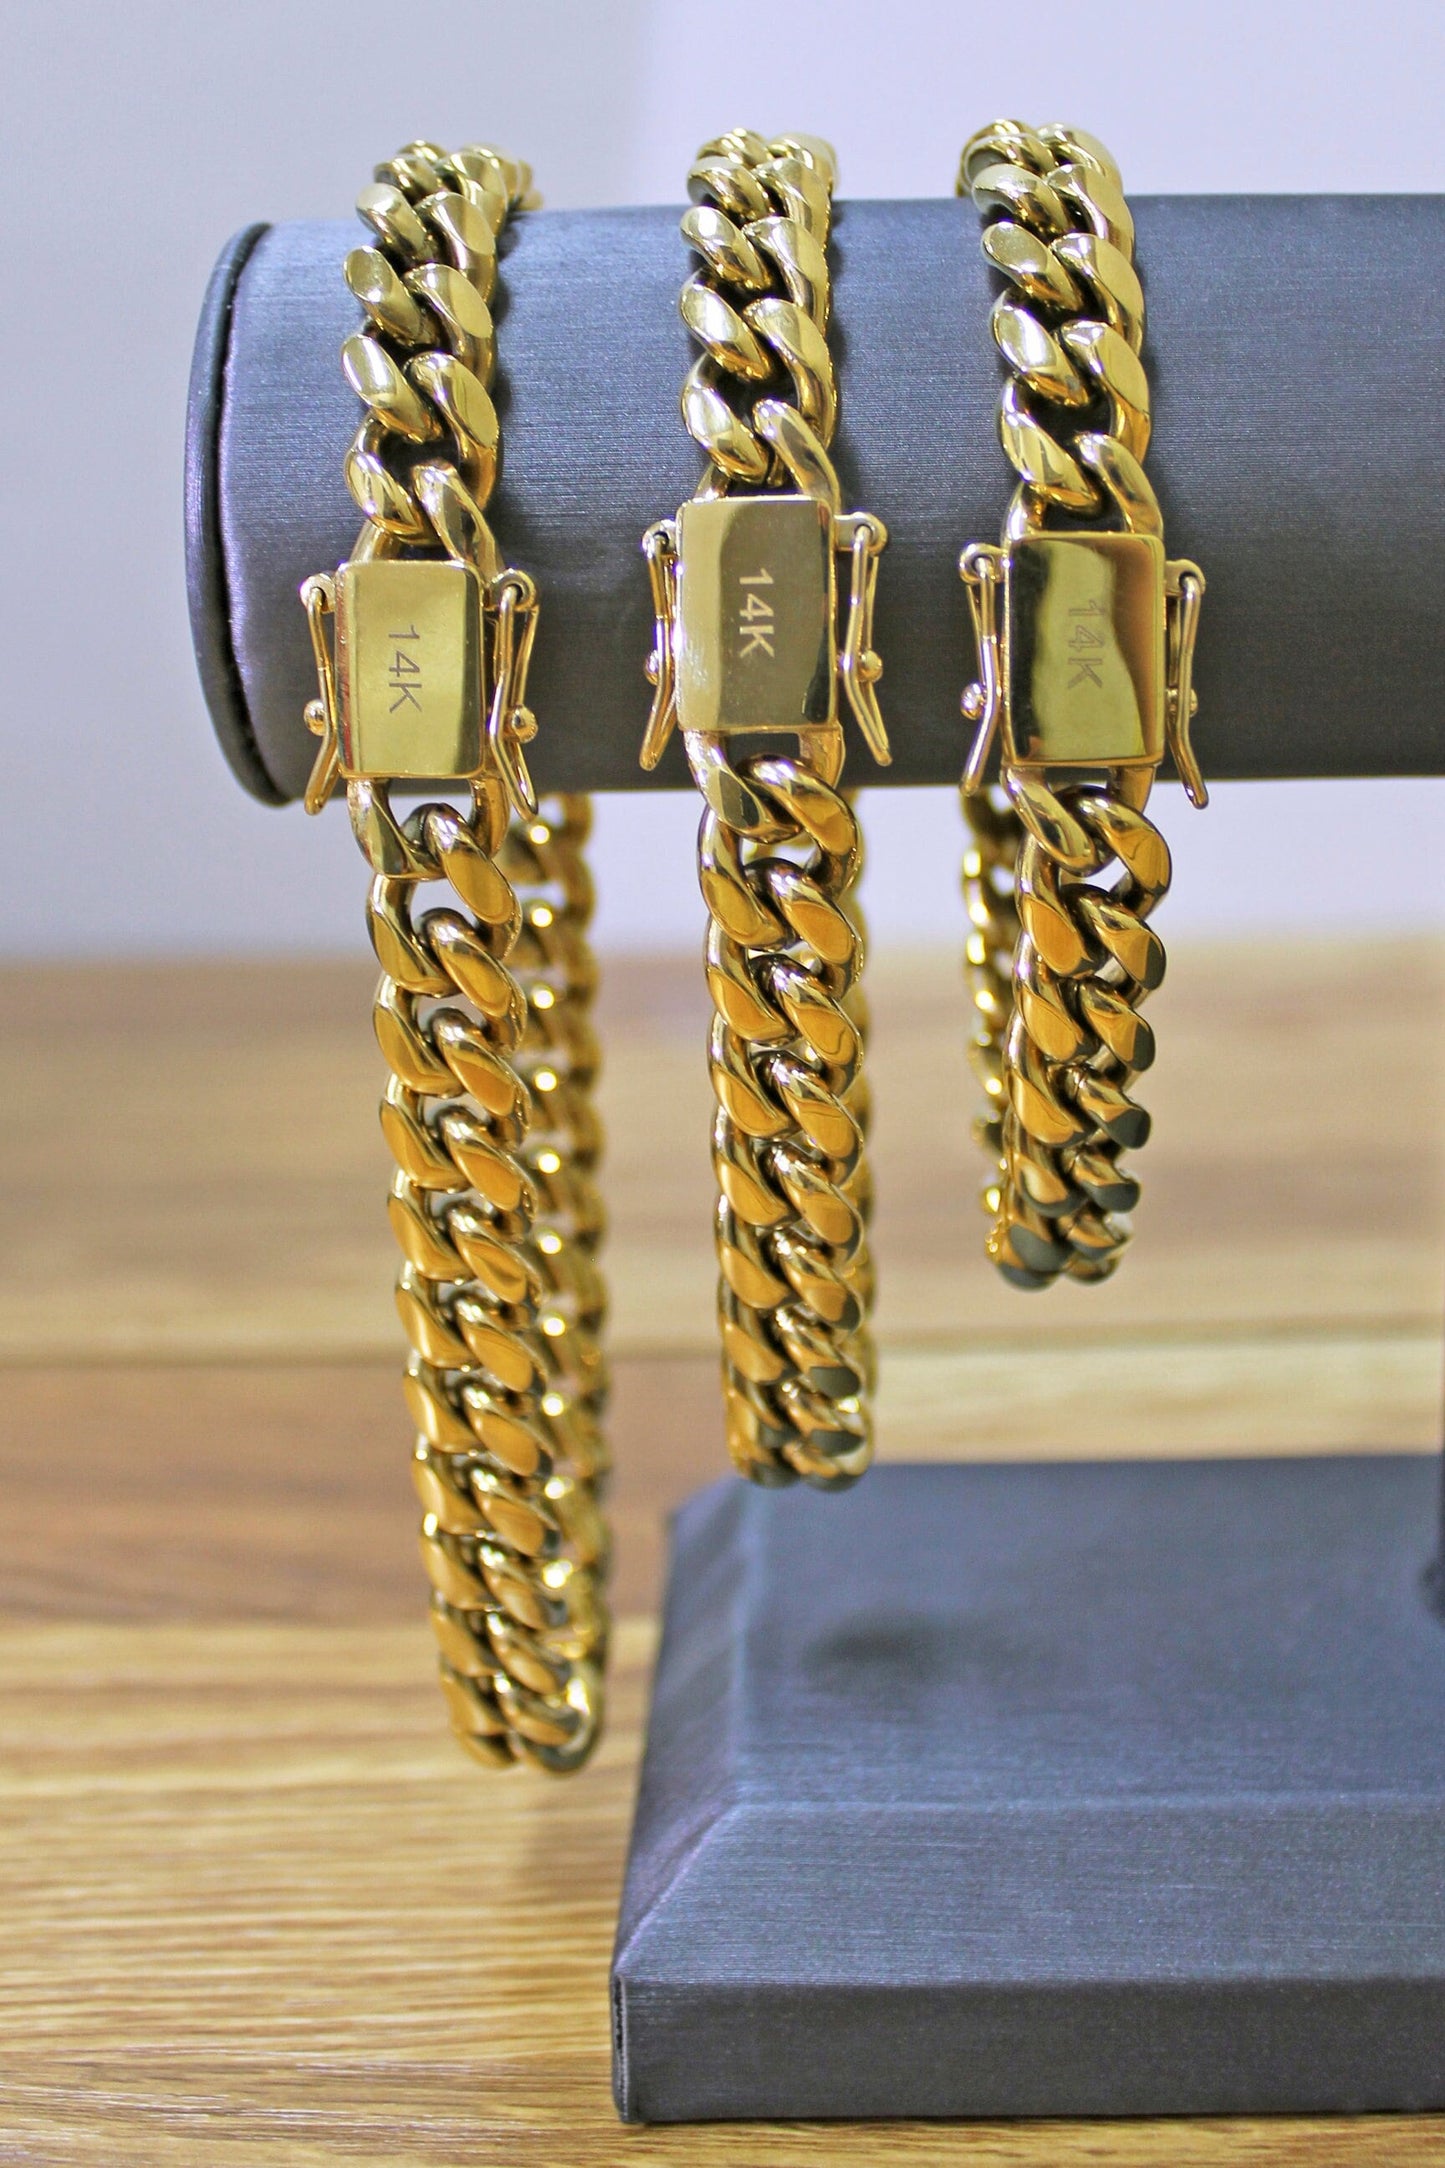 10mm Miami Cuban Link Bracelet In 14k Gold Filled Featuring Double Safety Lock Box Clasp, Unisex Curb Chain, Wholesale Jewelry Supplies